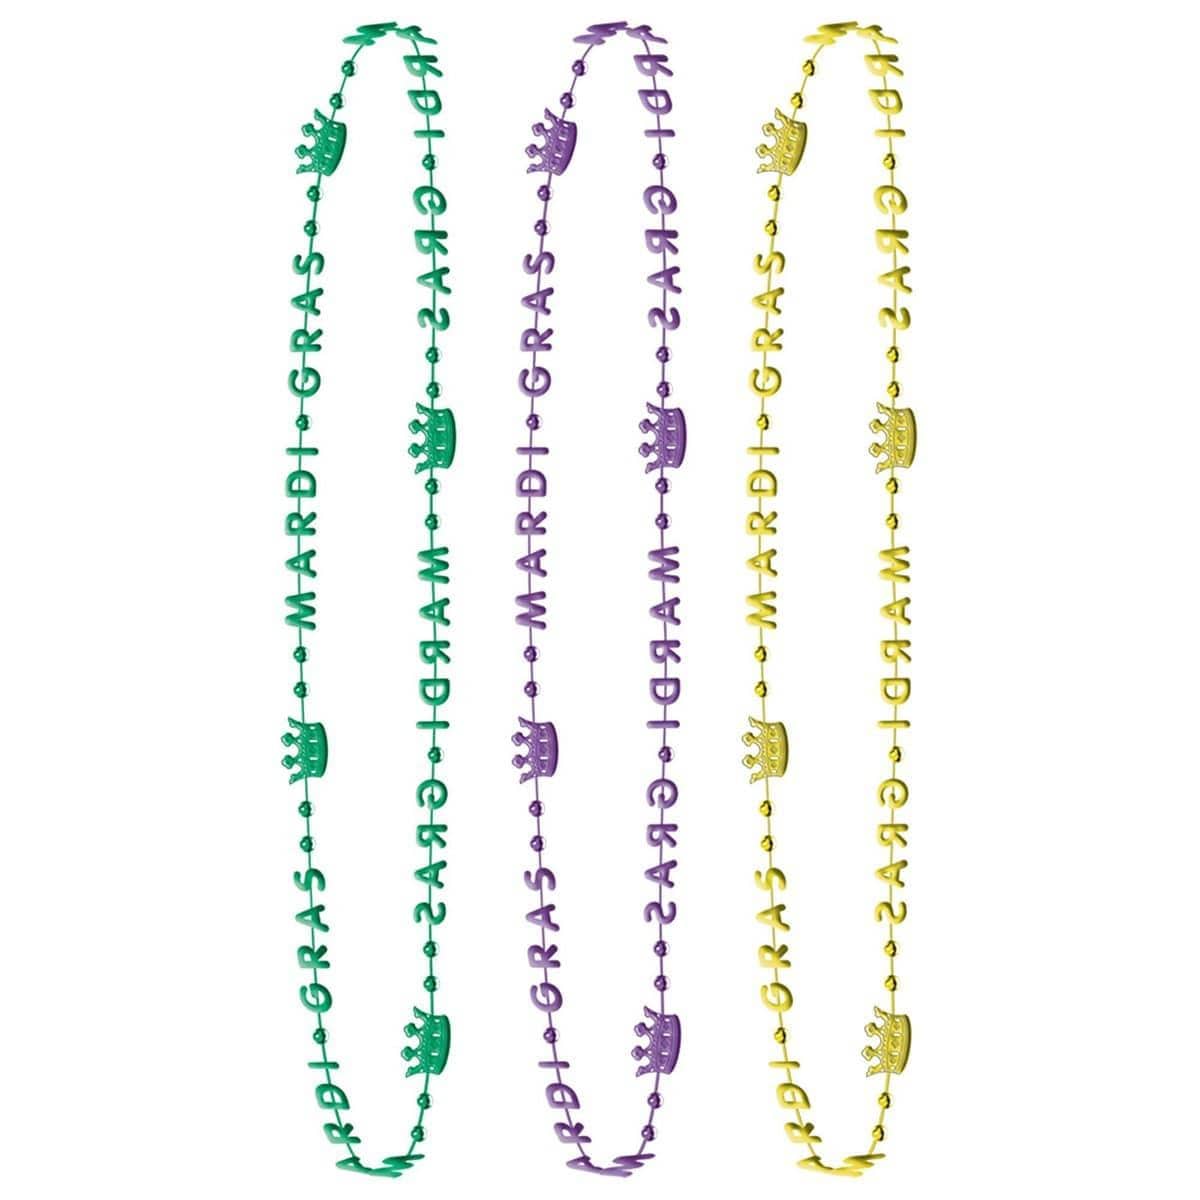 Buy Mardi Gras Mardi Gras, Crown Bead Necklace, 6 count sold at Party Expert